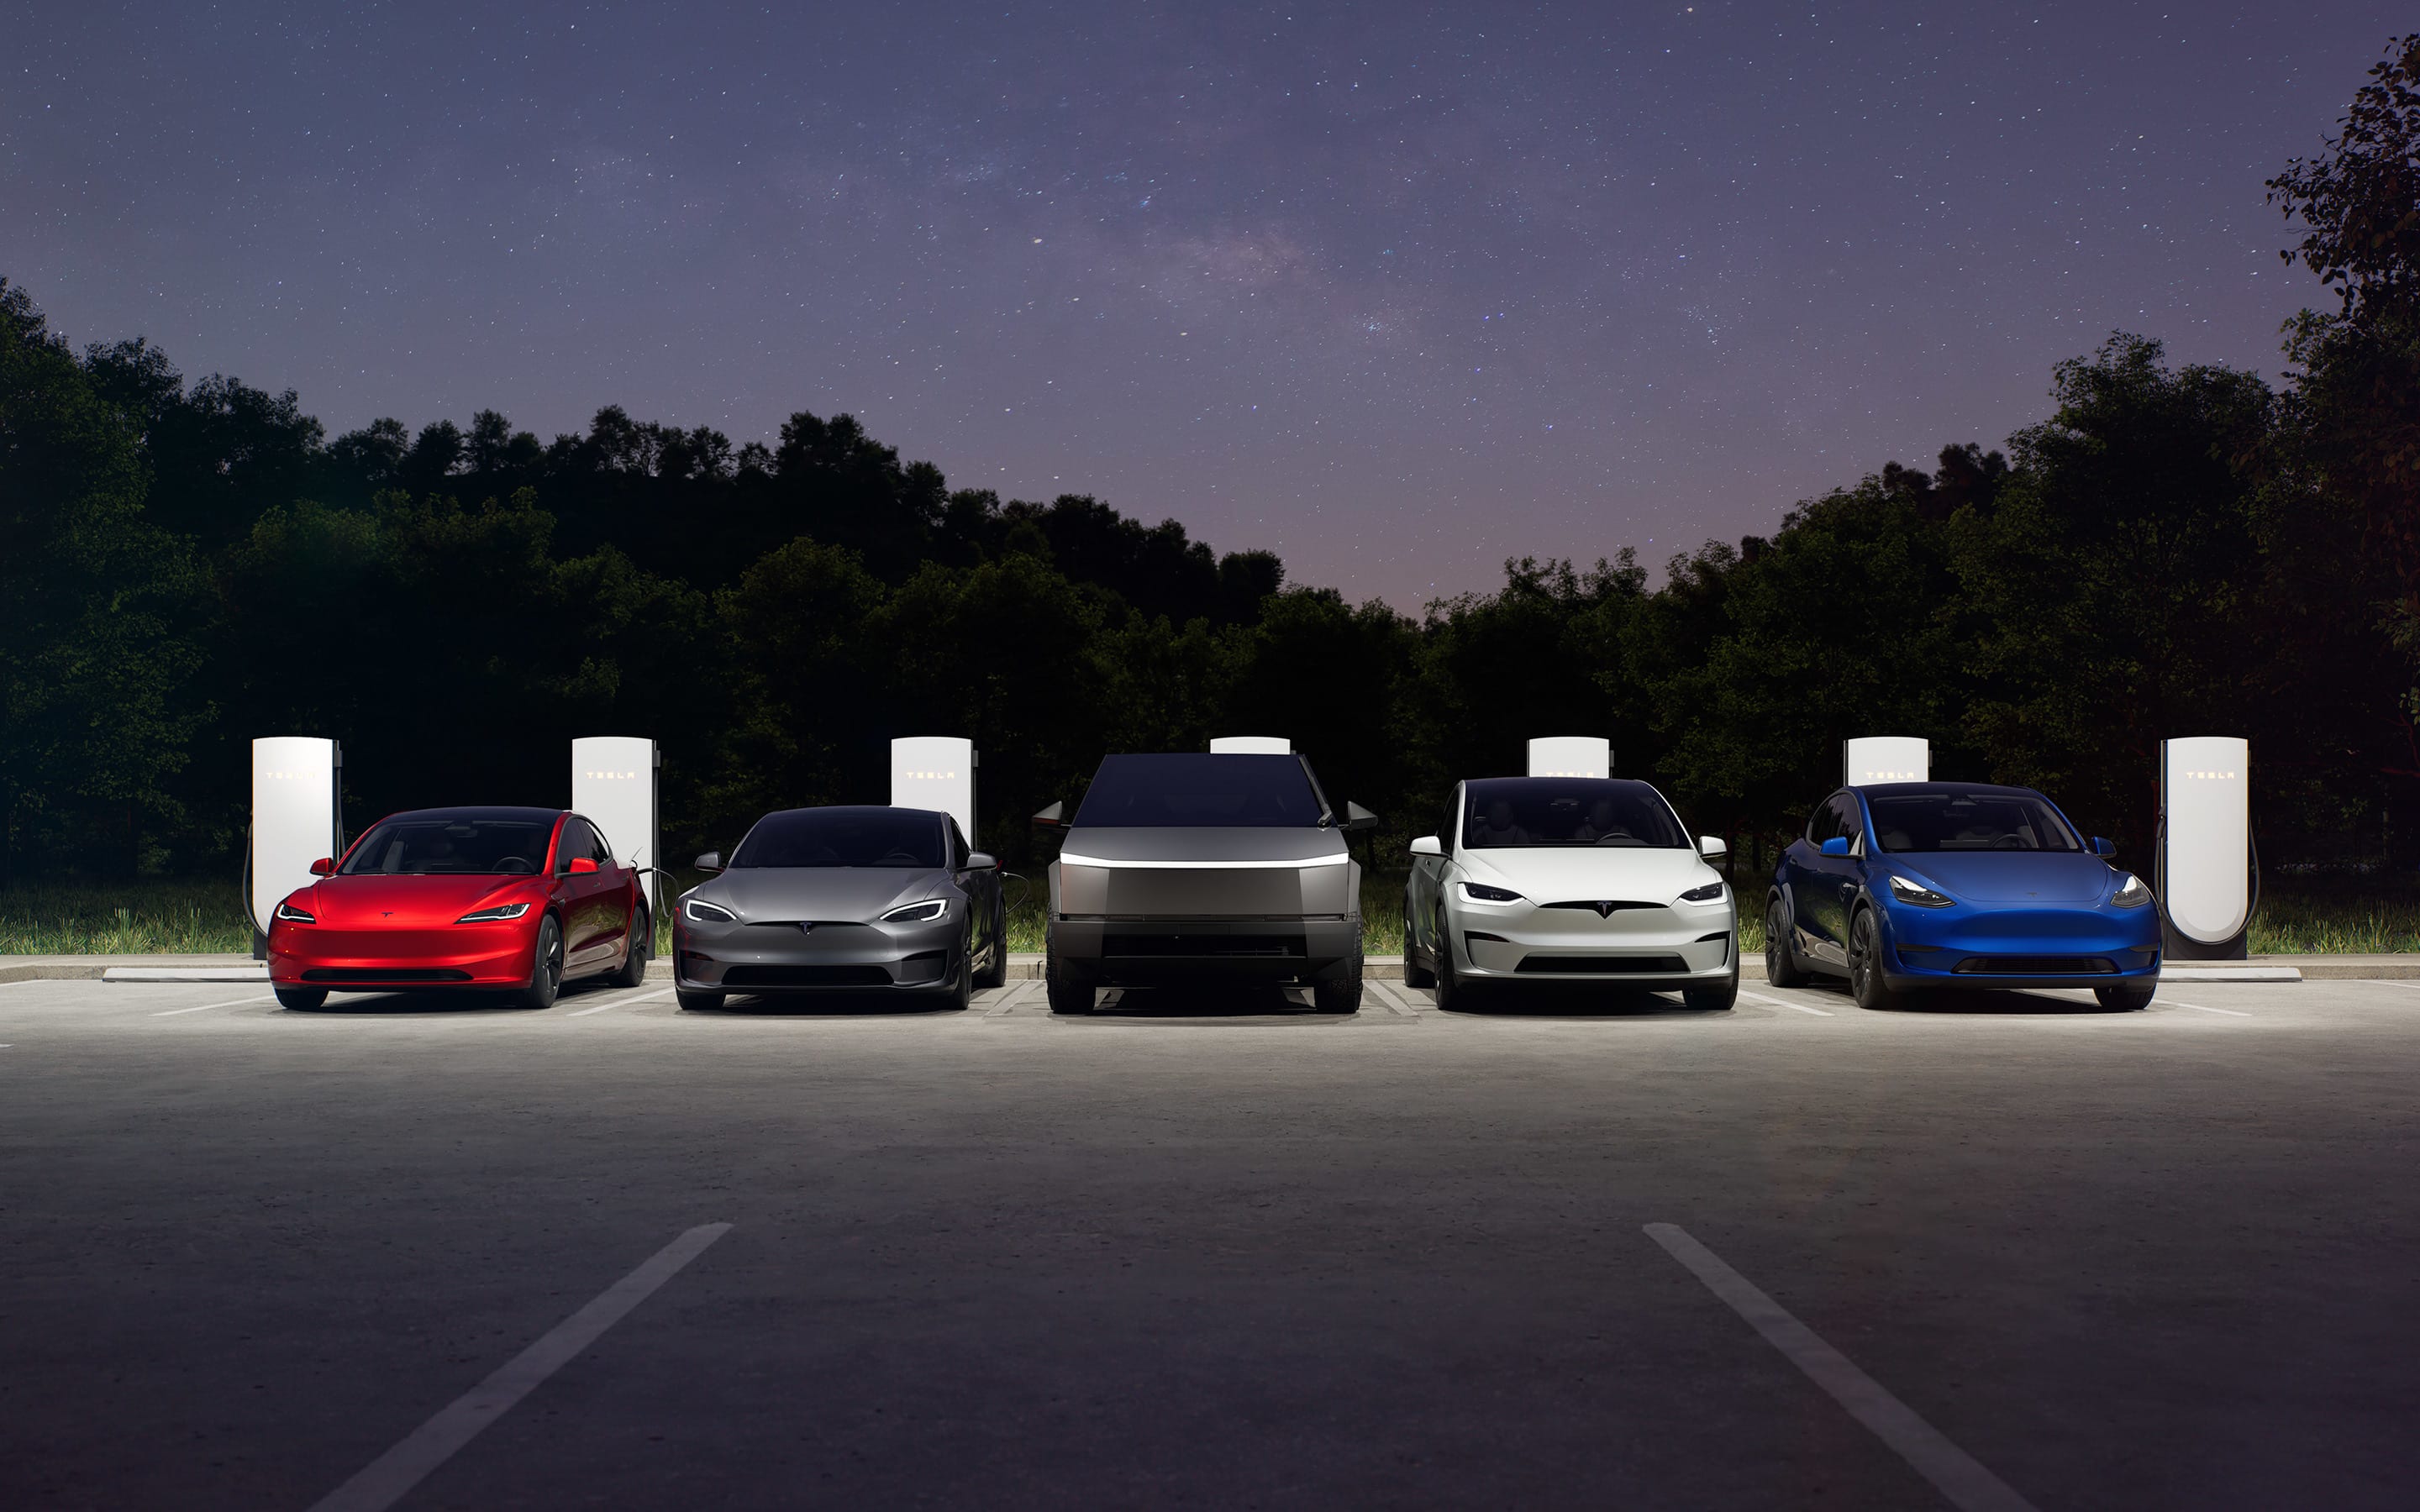 Model 3, Model S, Cybertruck, Model X and Model Y Supercharging in a parking lot during early evening